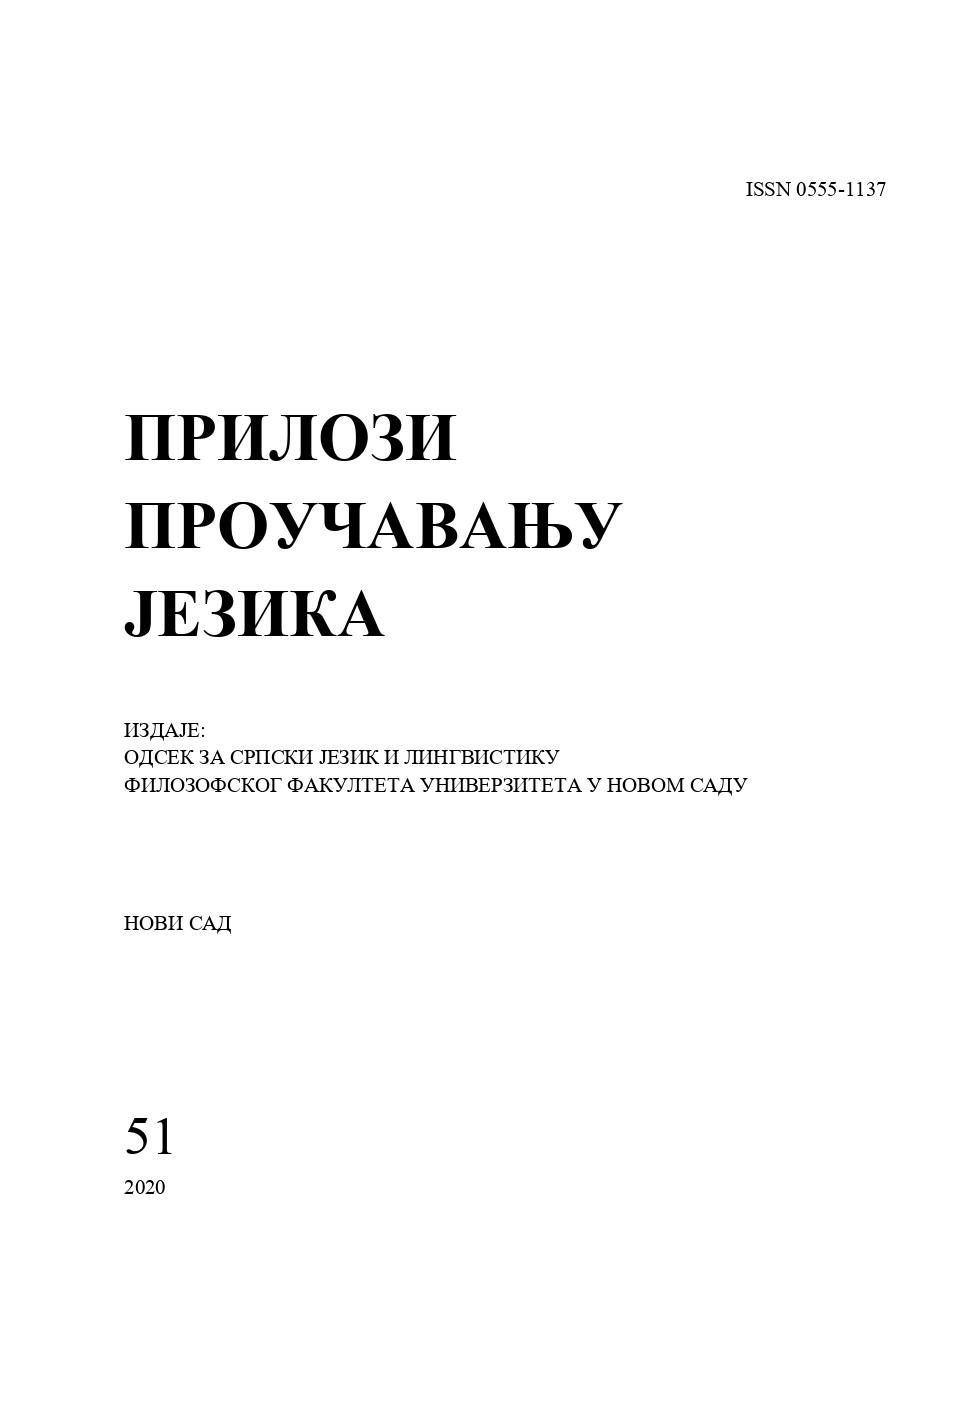 Determining the authorship of I. Andrić in controversial texts published in the journal Sveske of the Ivo Andrić Endowment (issues 16 and 17) Cover Image